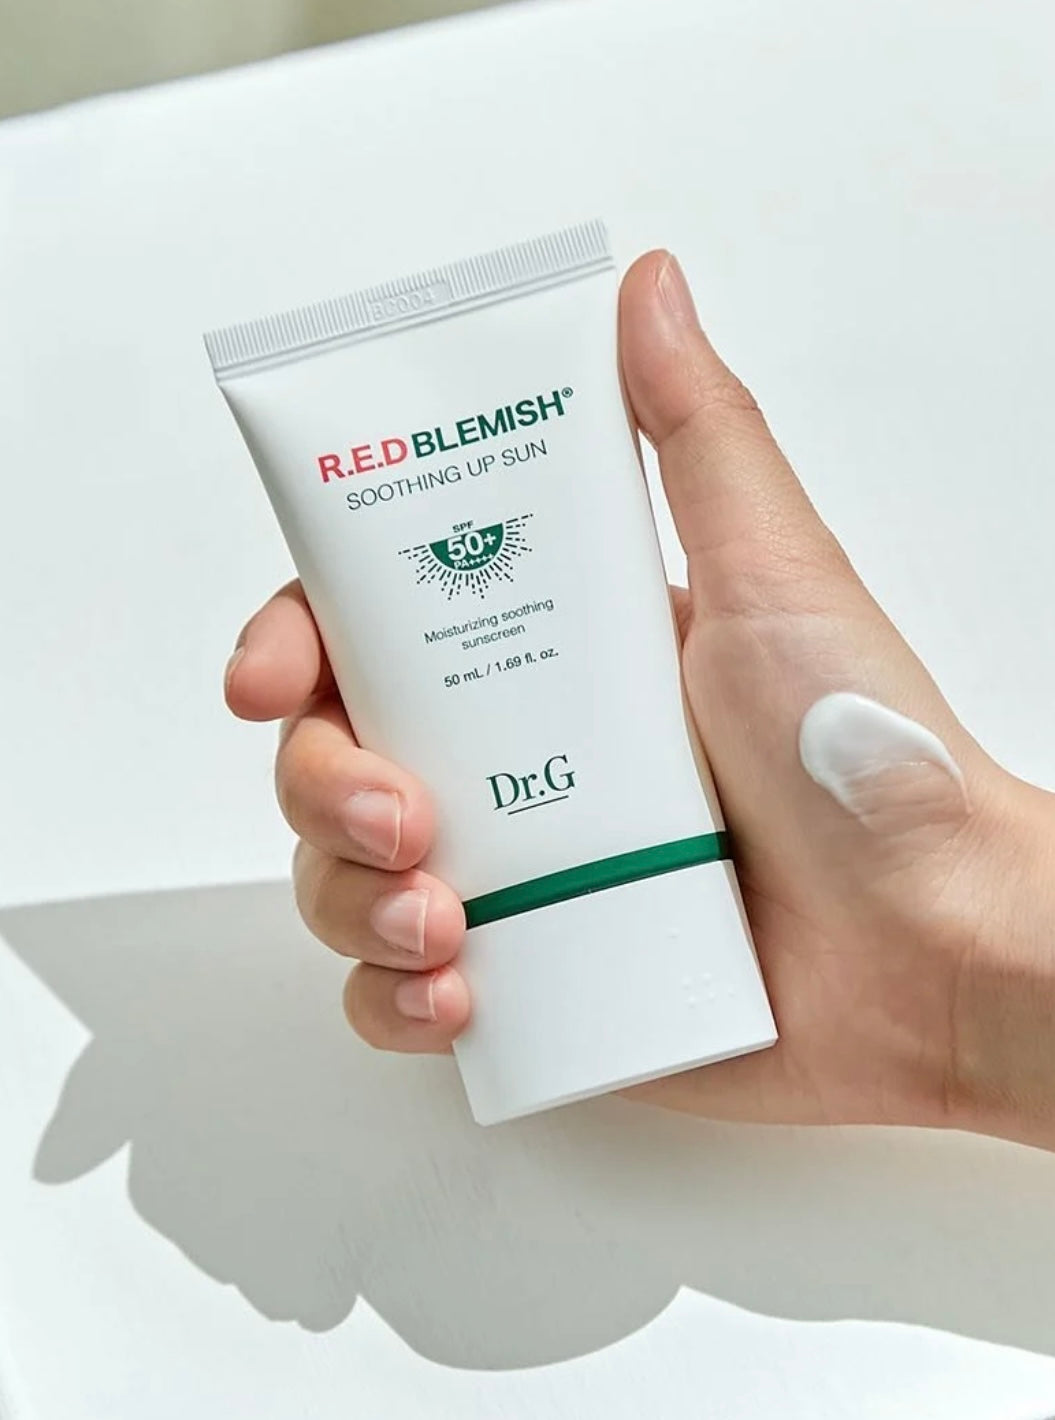 Dr.G Red Blemish Soothing Up Sun